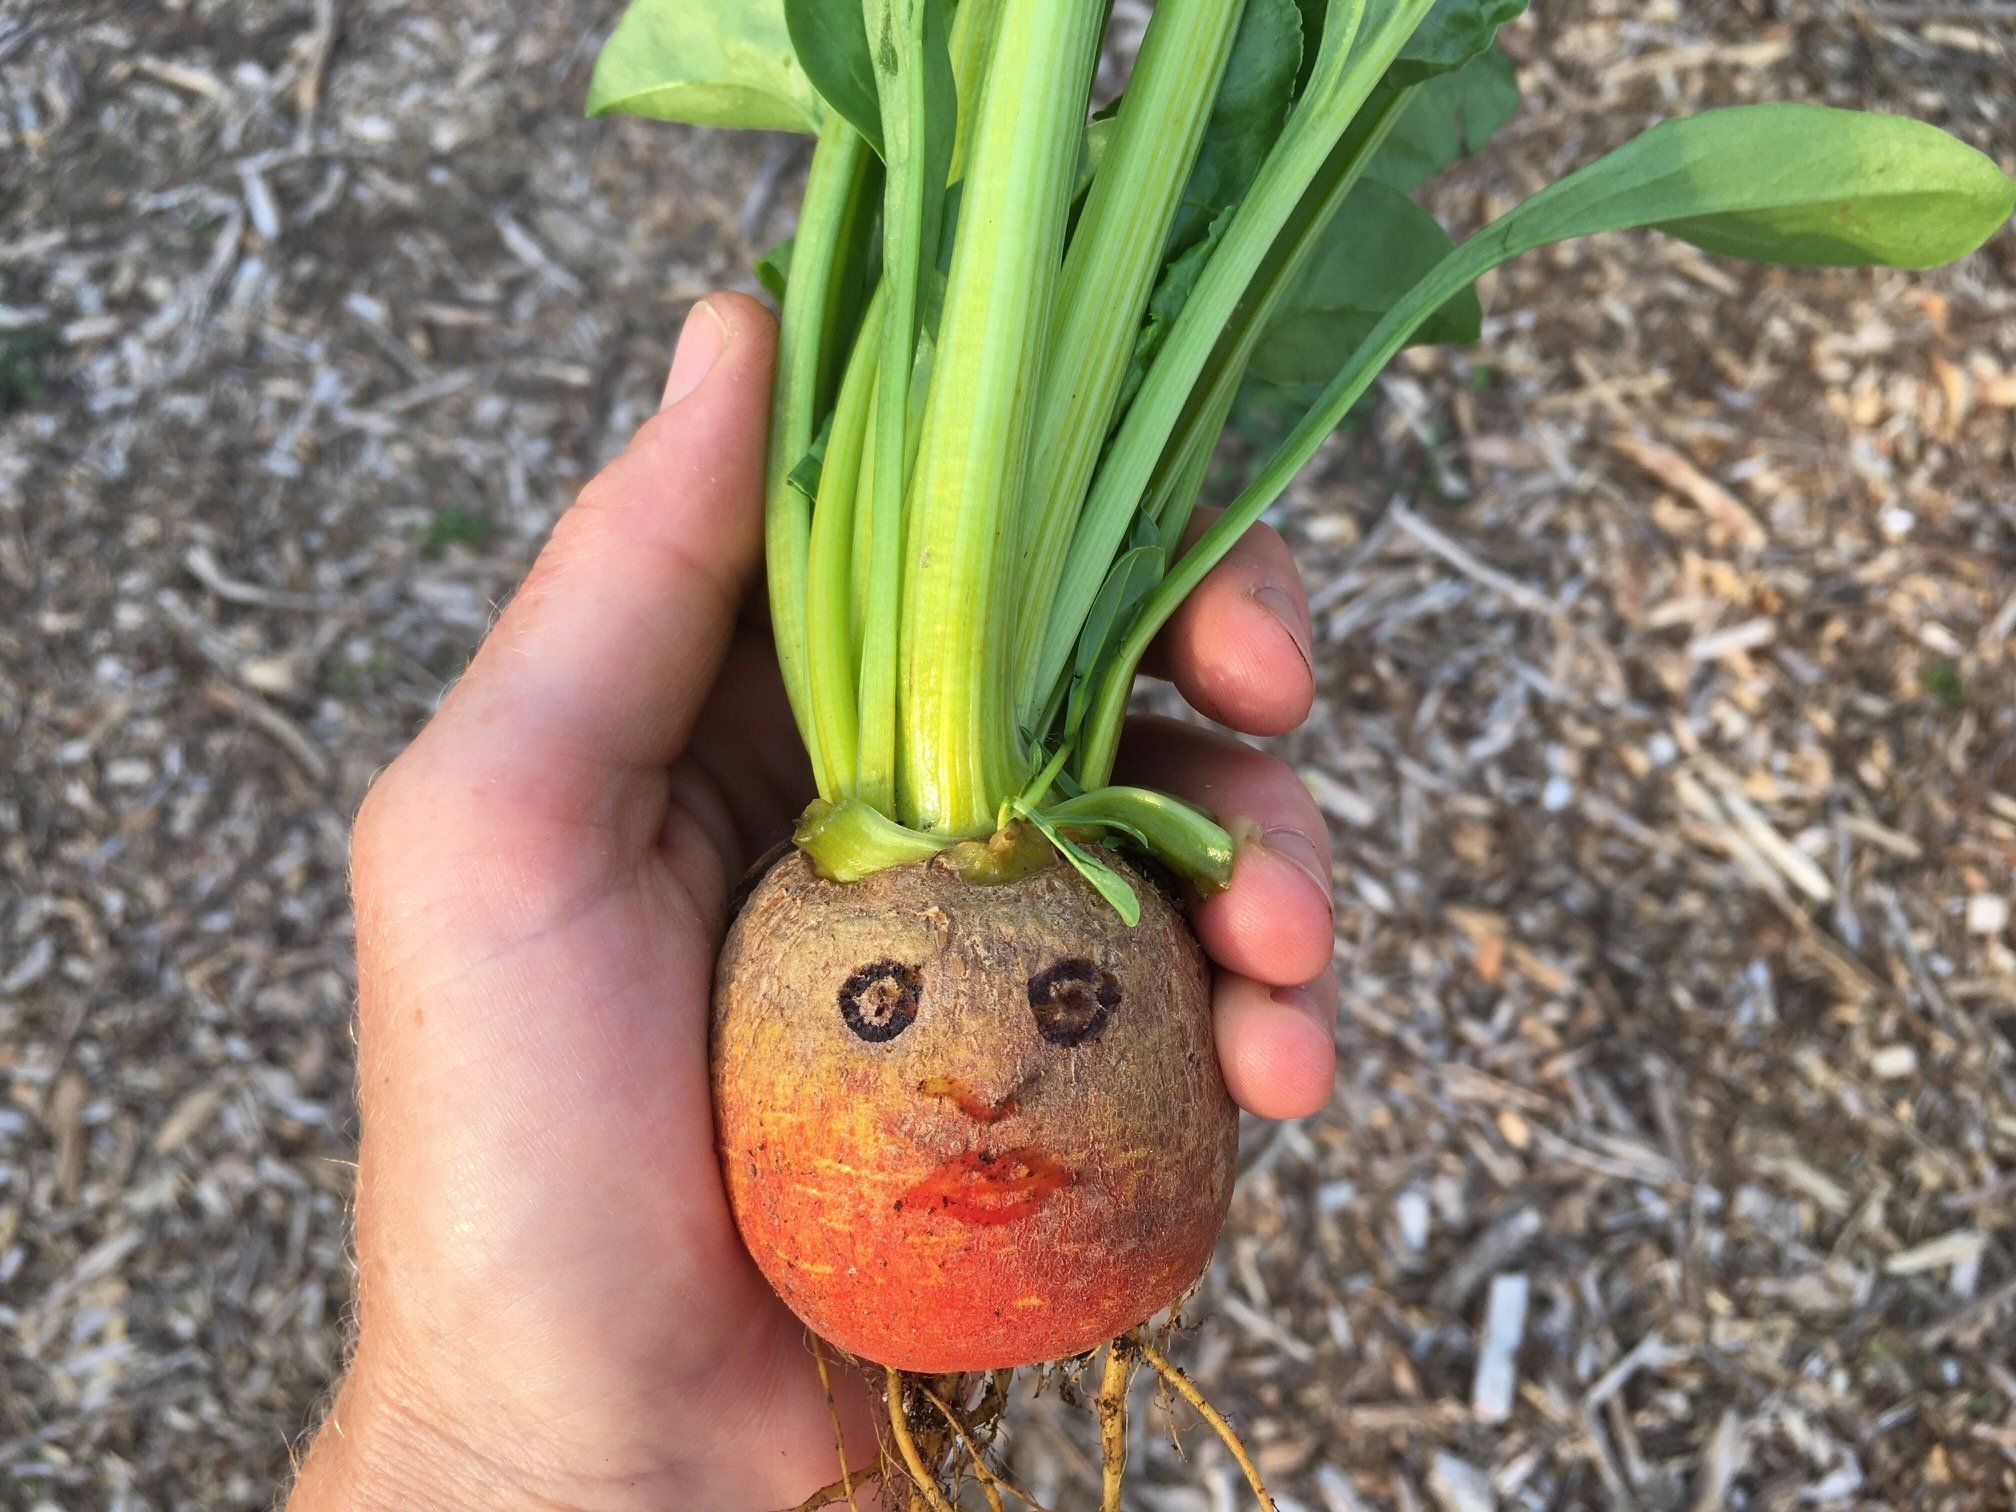 Previous Happening: The Veggies are Talking (To Me)